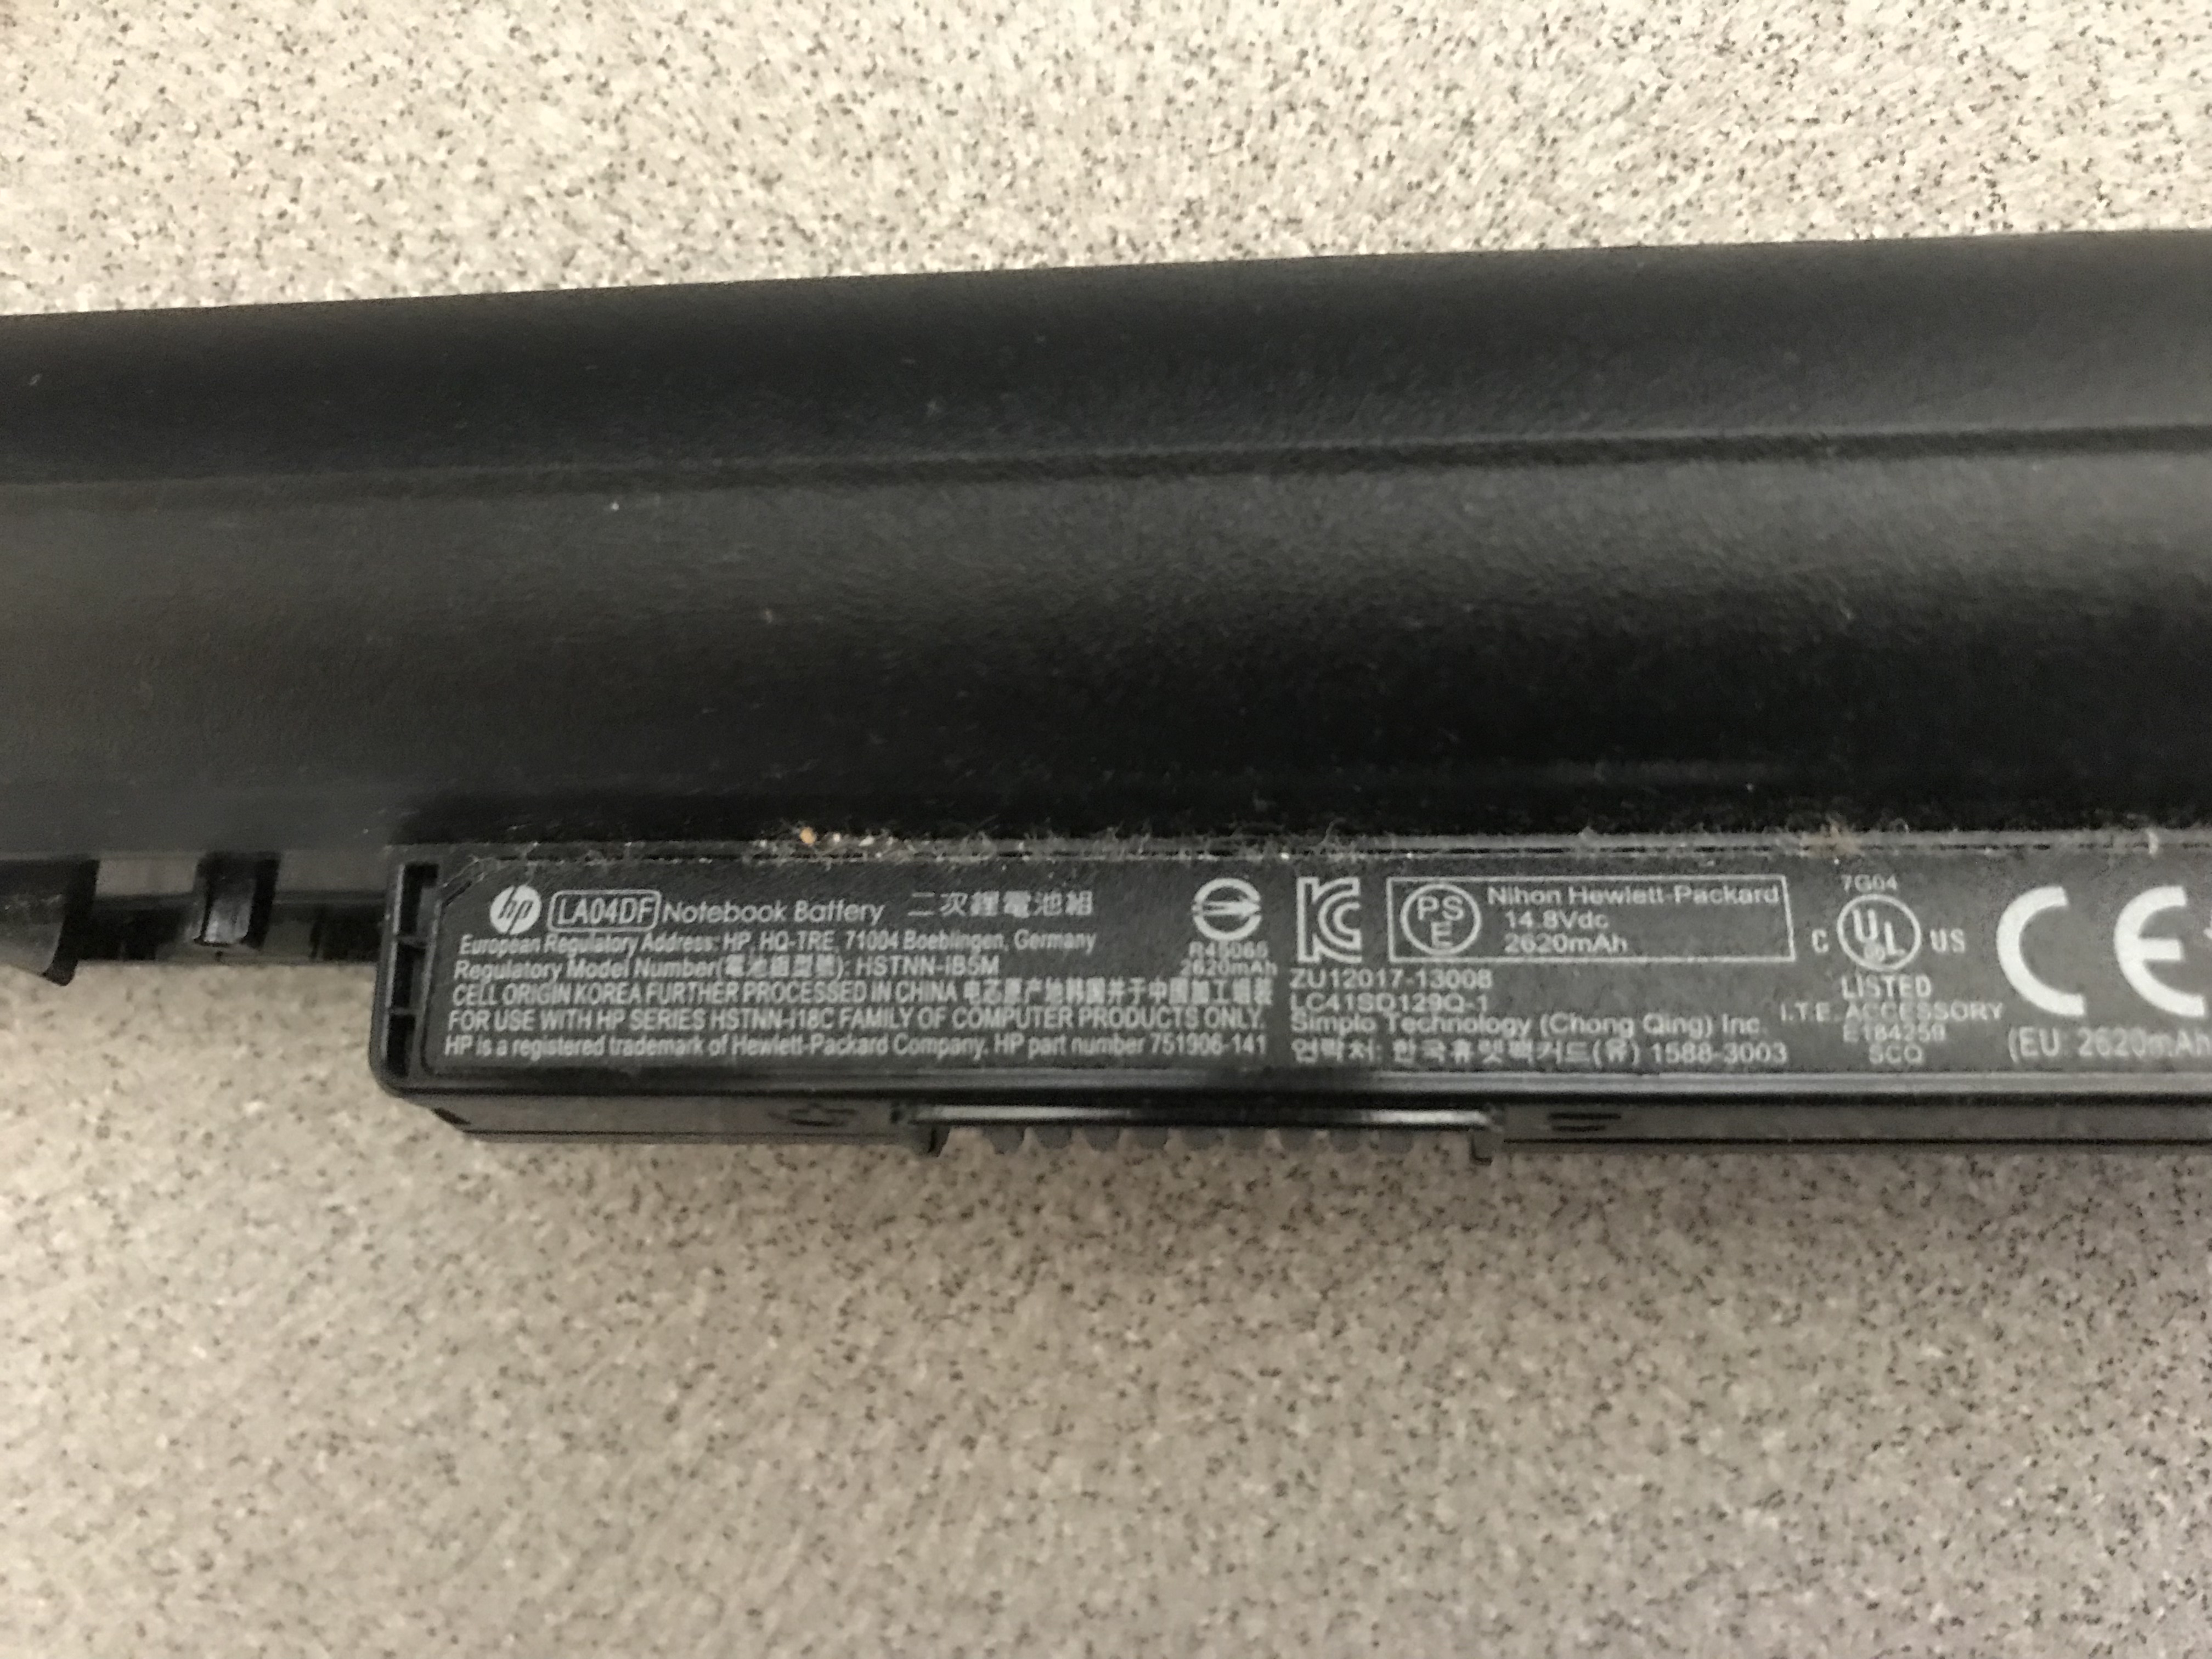 Can't find HP 340 G1 replacement battery - HP Support Community - 7008942